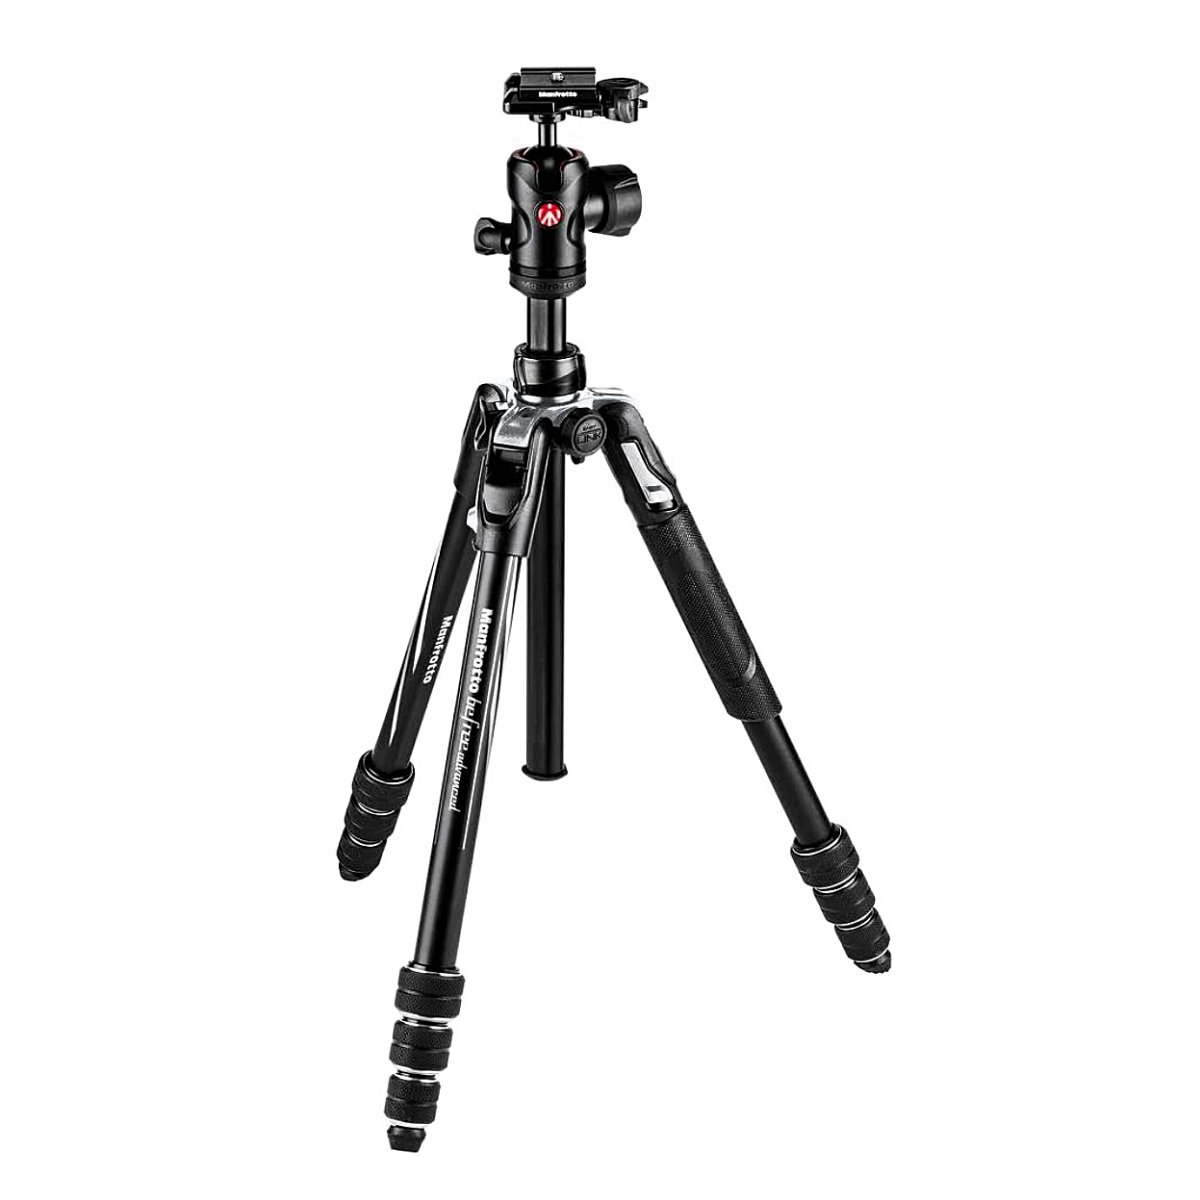 A Manfrotto Befree Advanced Tripod with Ball Head